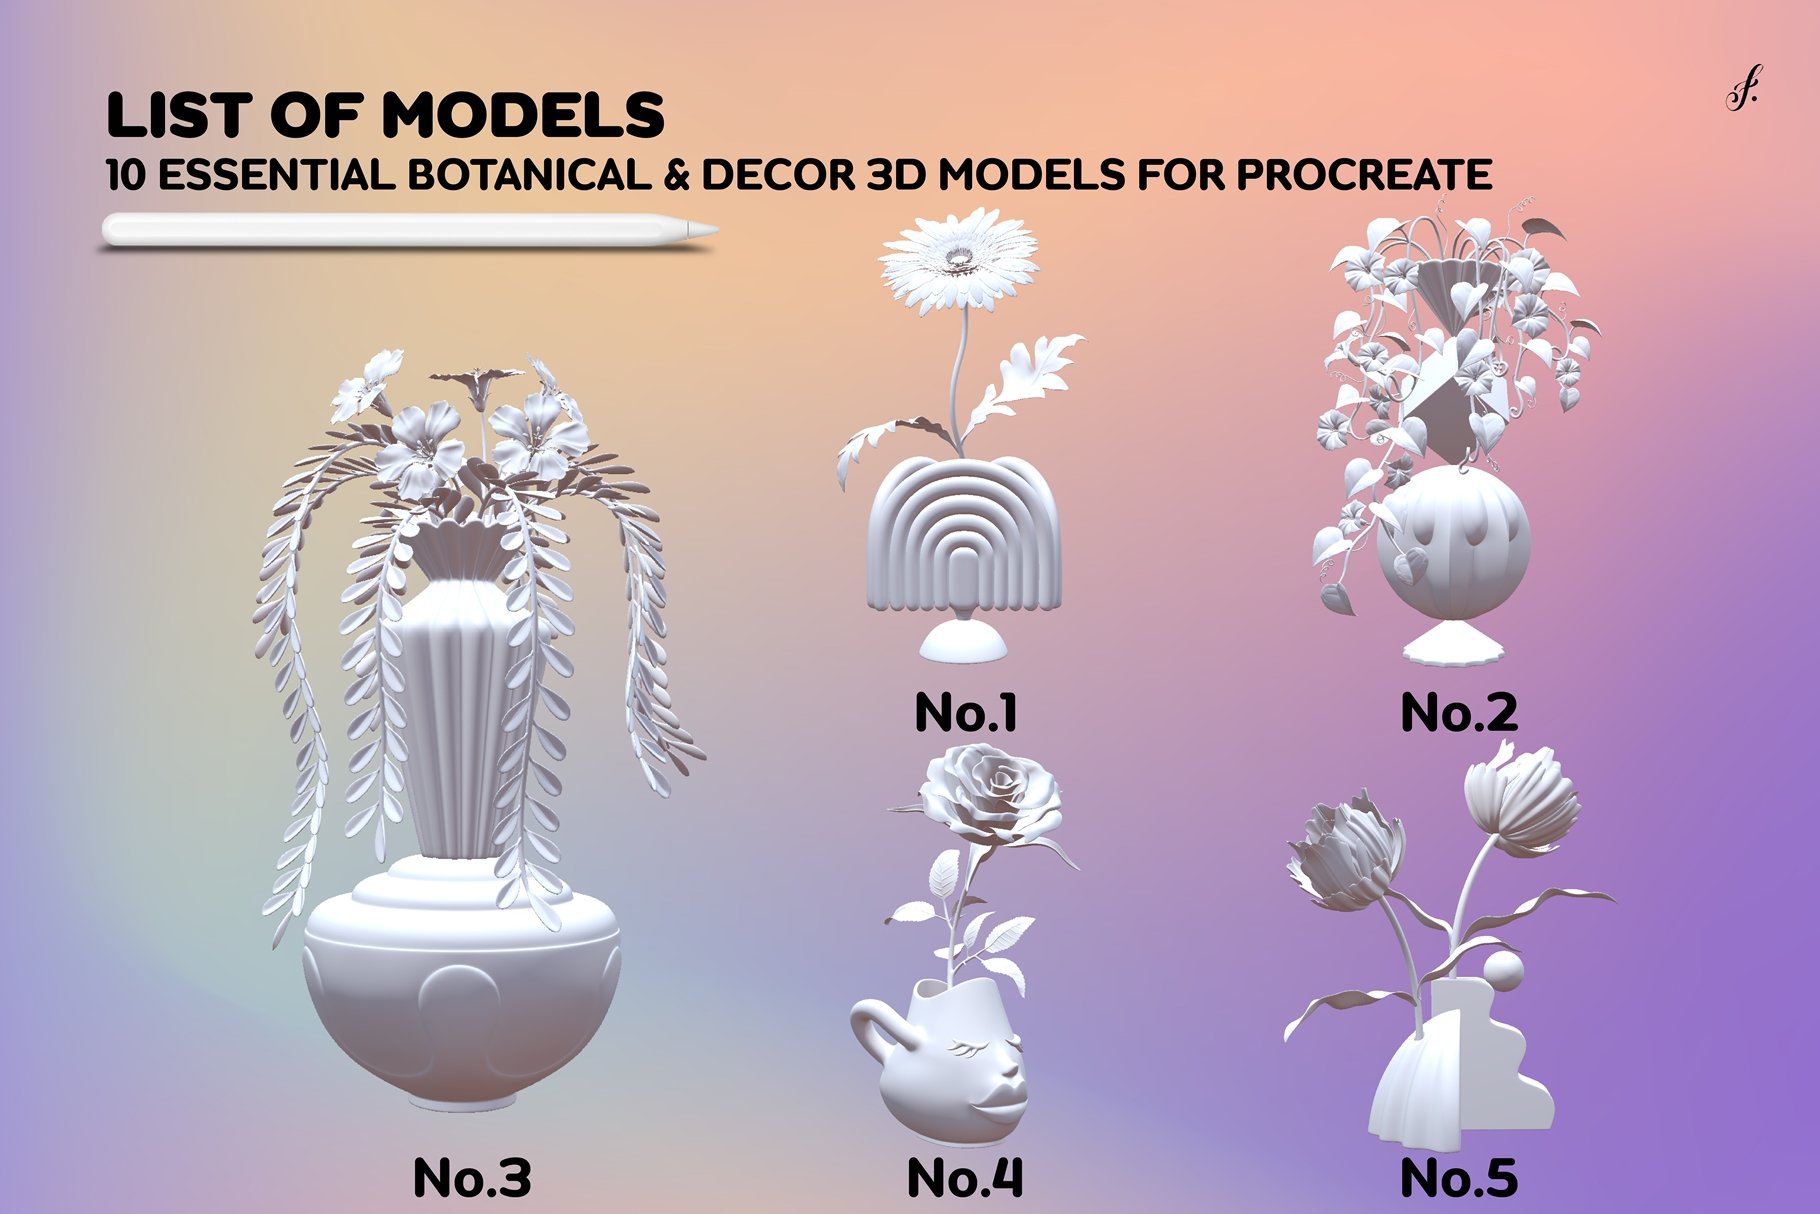 3d models for procreate free download